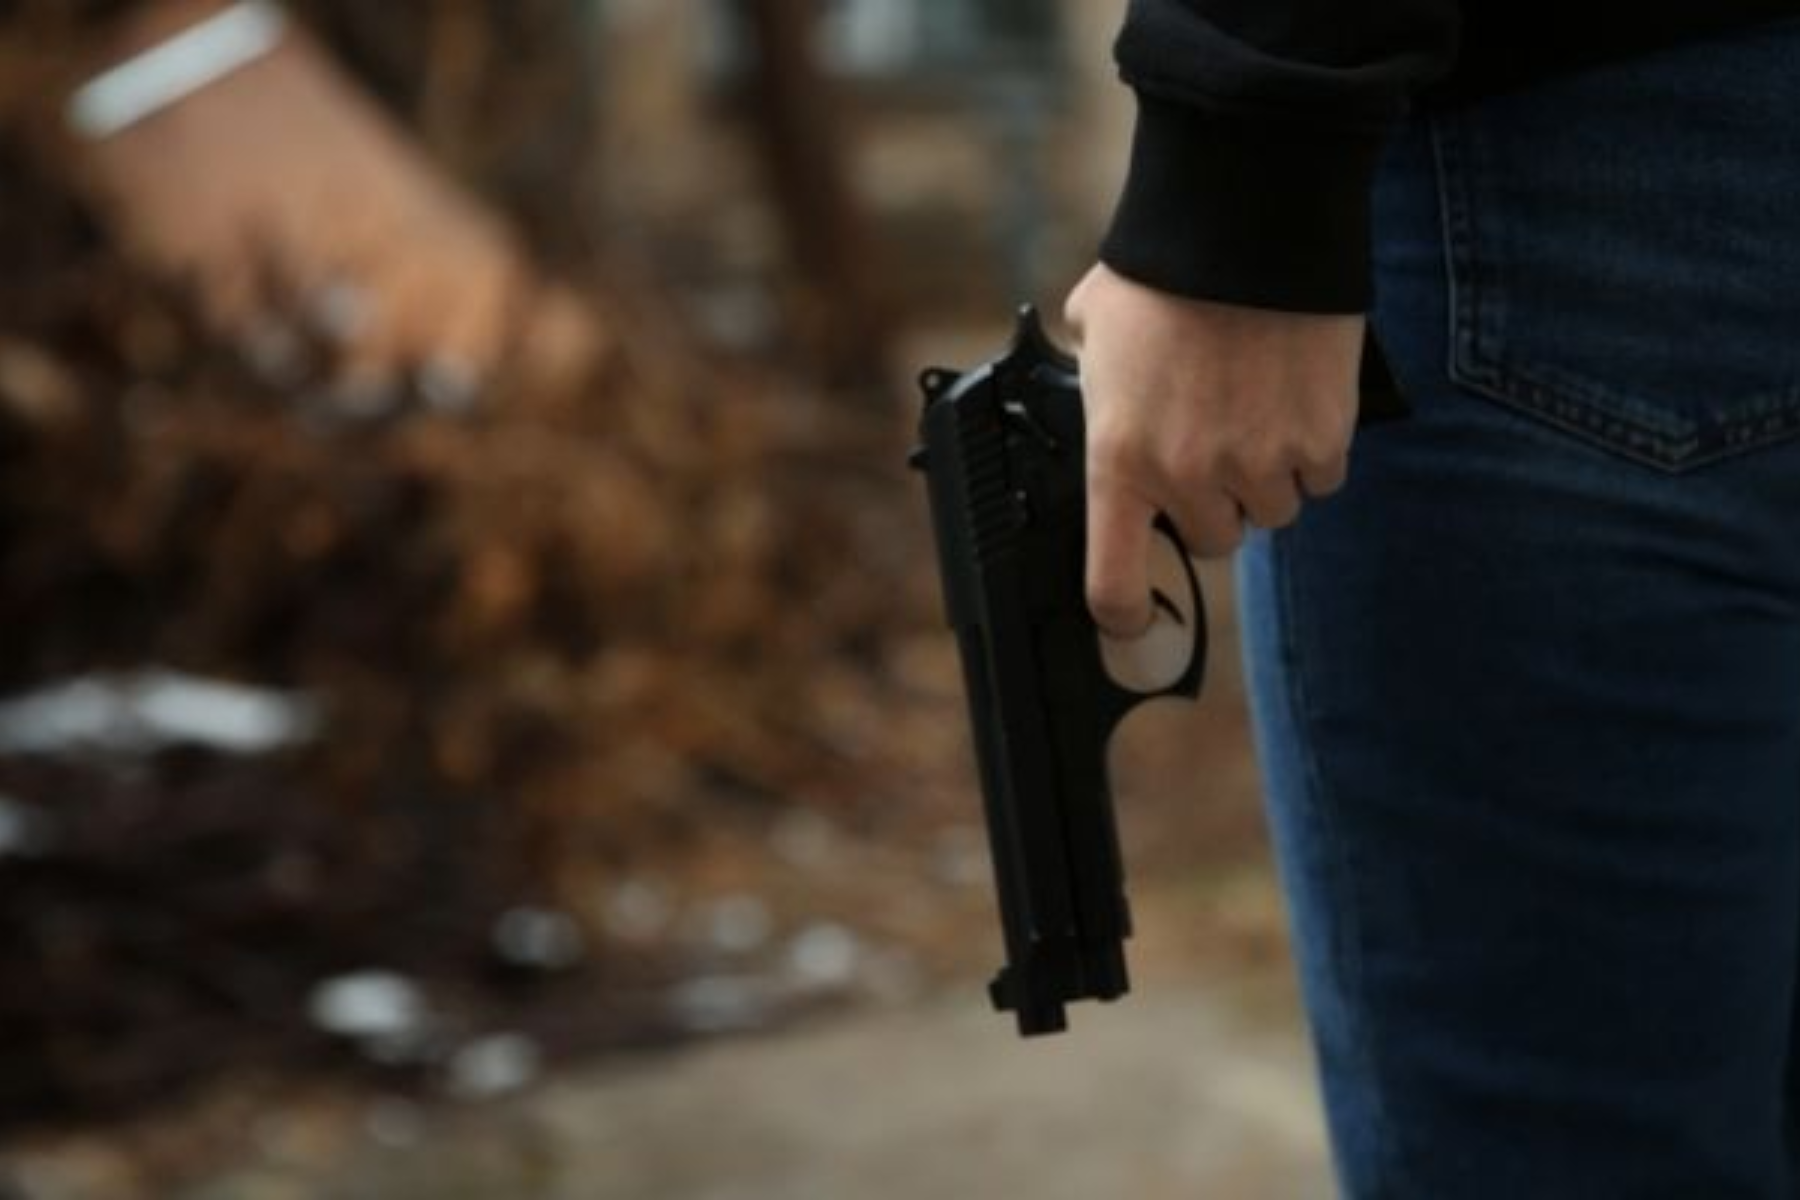 A man in jeans and a black jacket holds a gun and points it downward